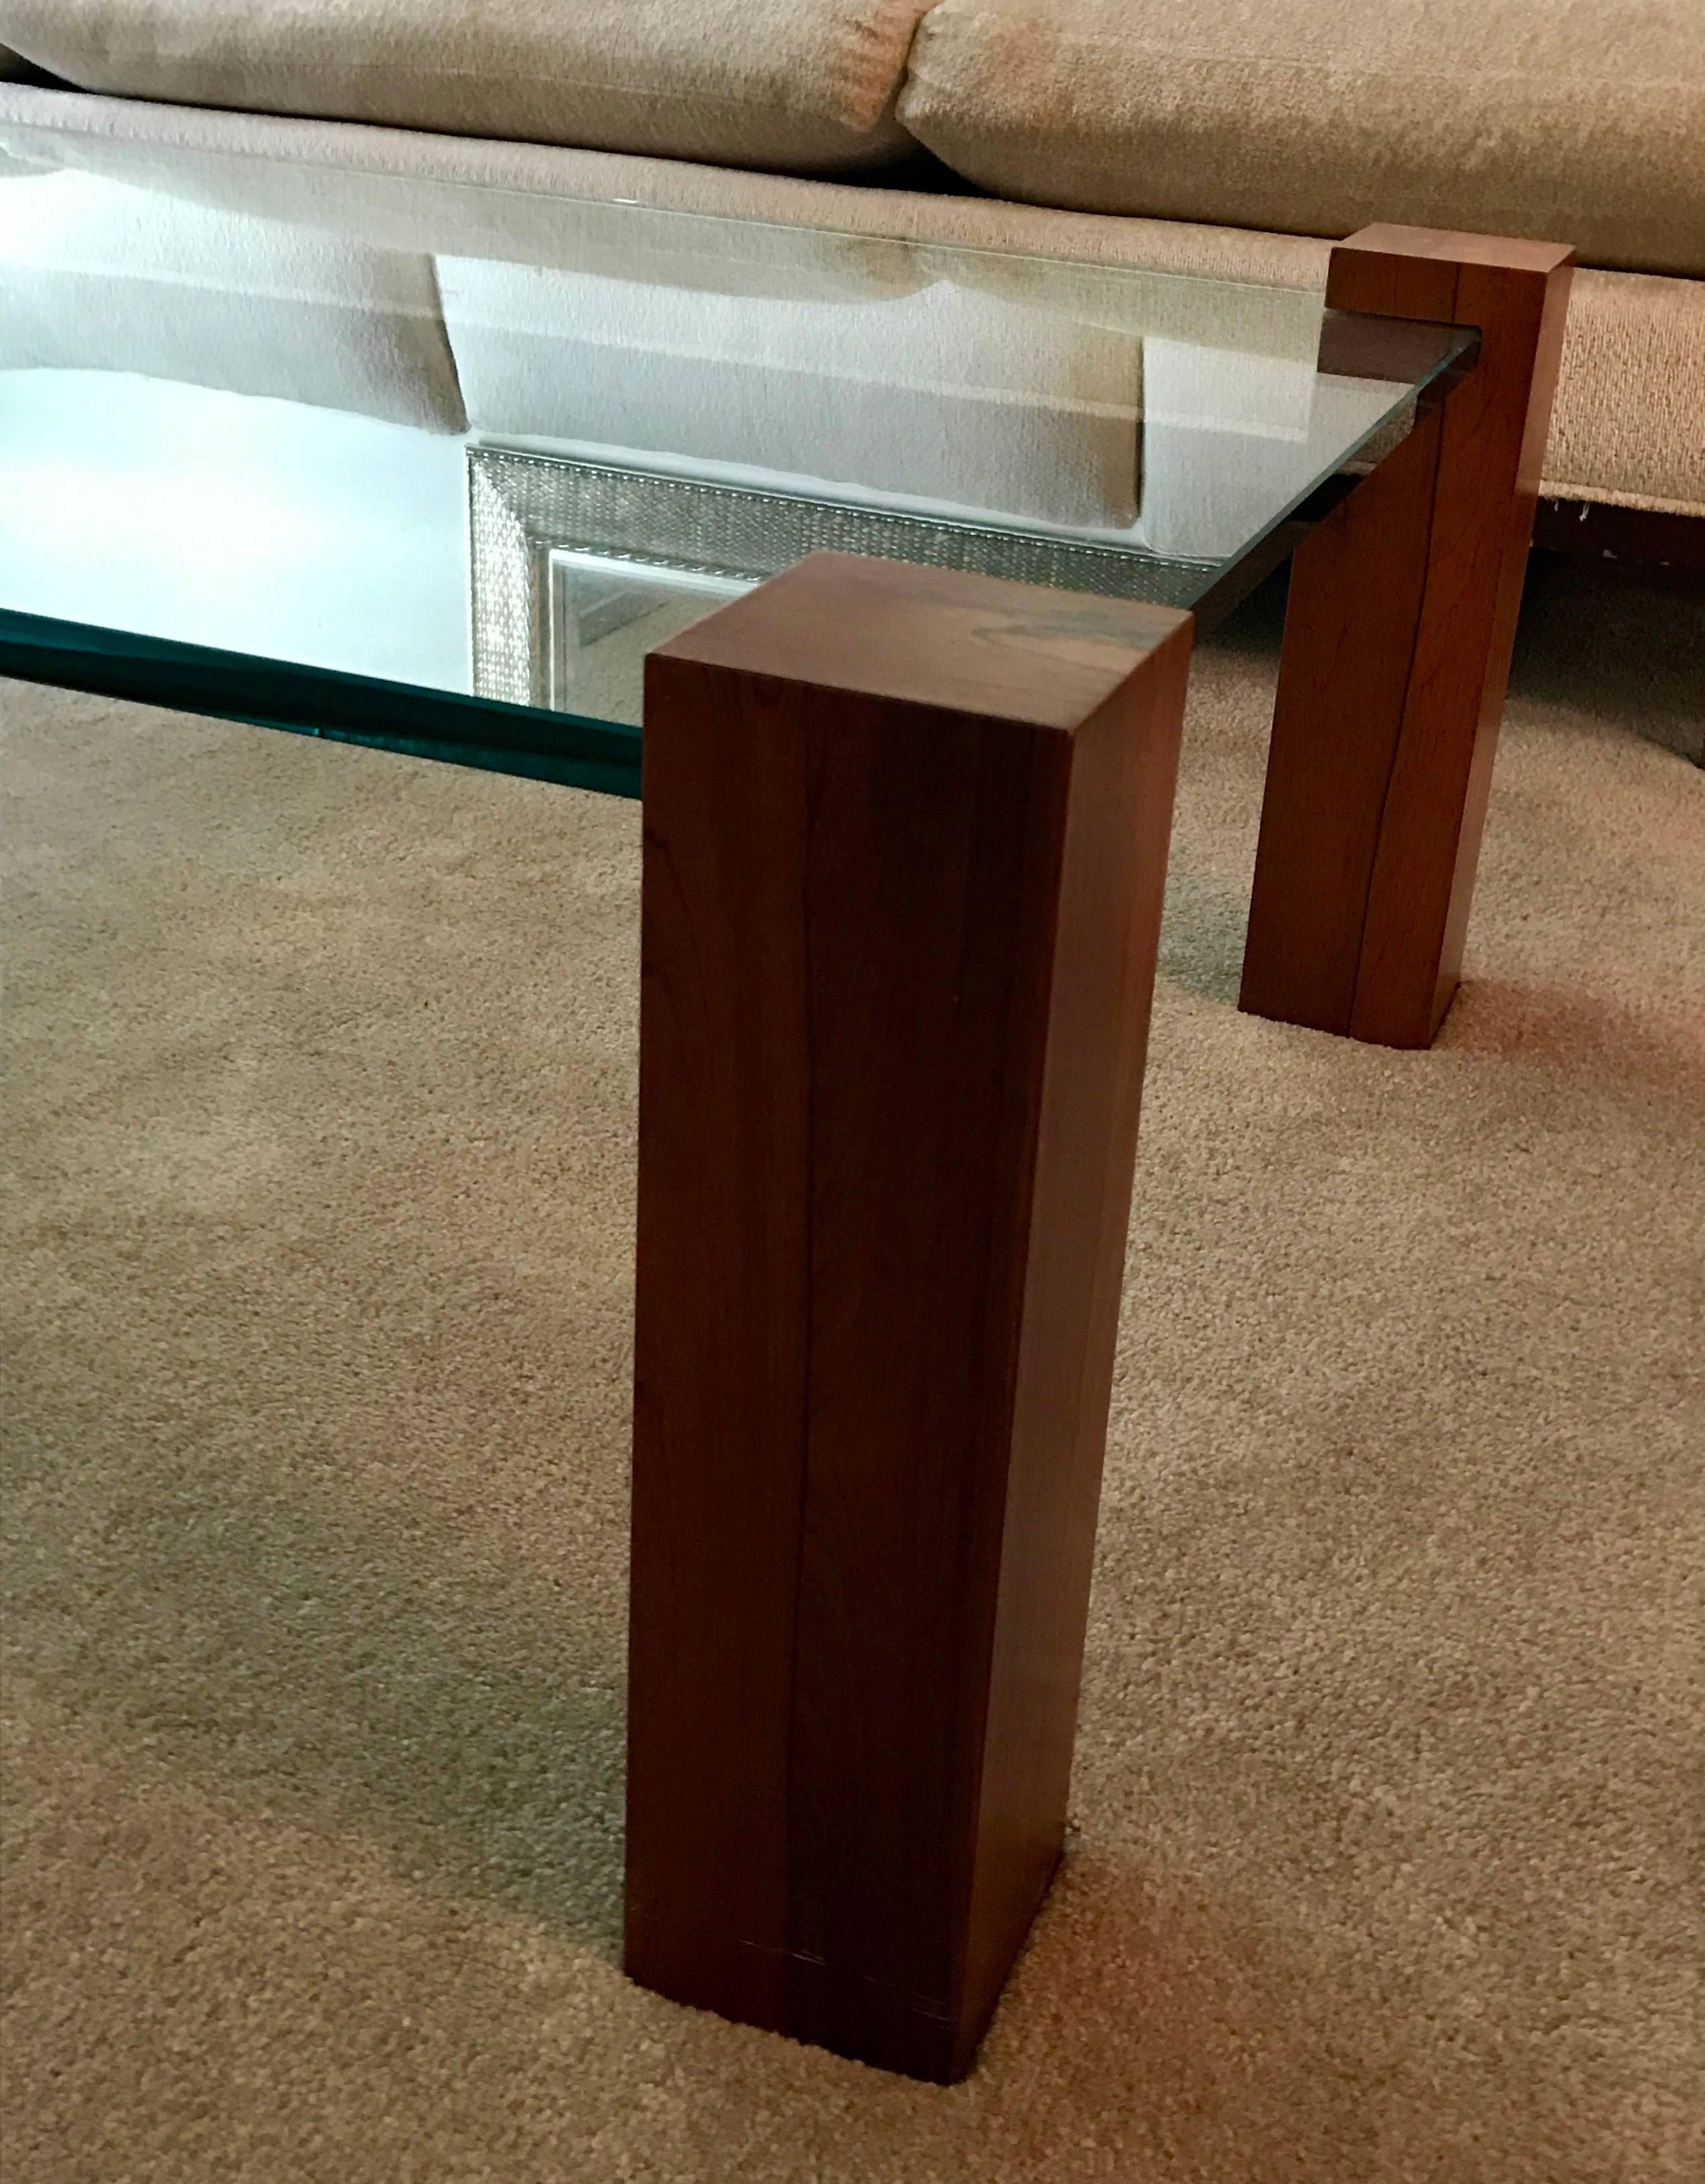 An early version in walnut of the now iconic chrome and steel coffee table by Paul Evans. Thick 3/4 inch thick clear glass rests within the walnut square towers.